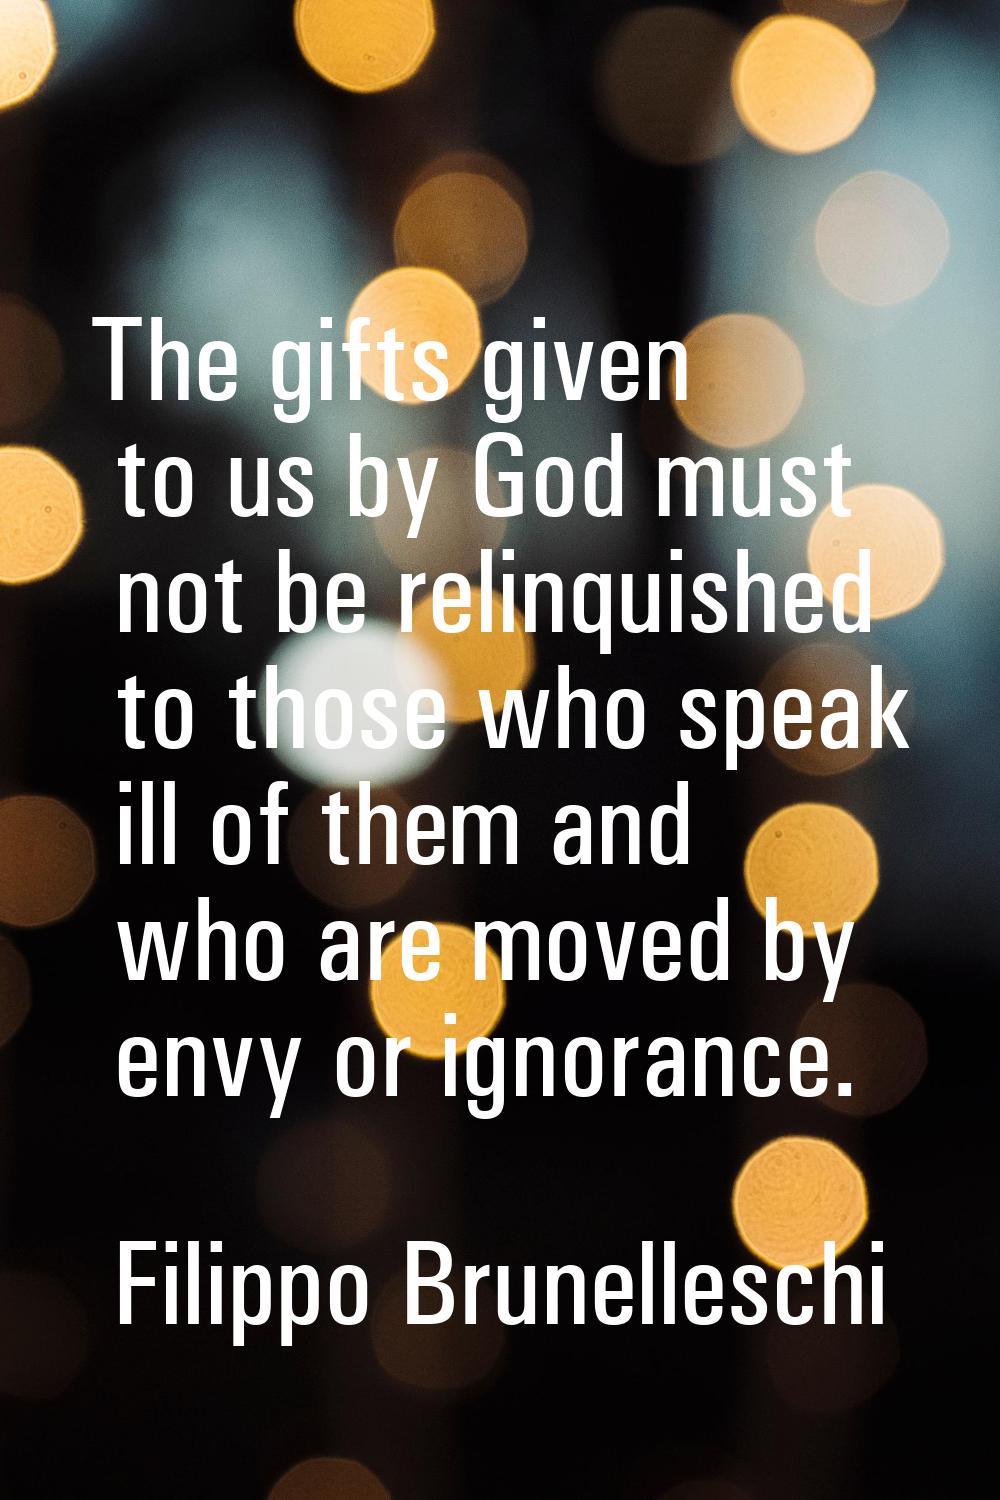 The gifts given to us by God must not be relinquished to those who speak ill of them and who are mo